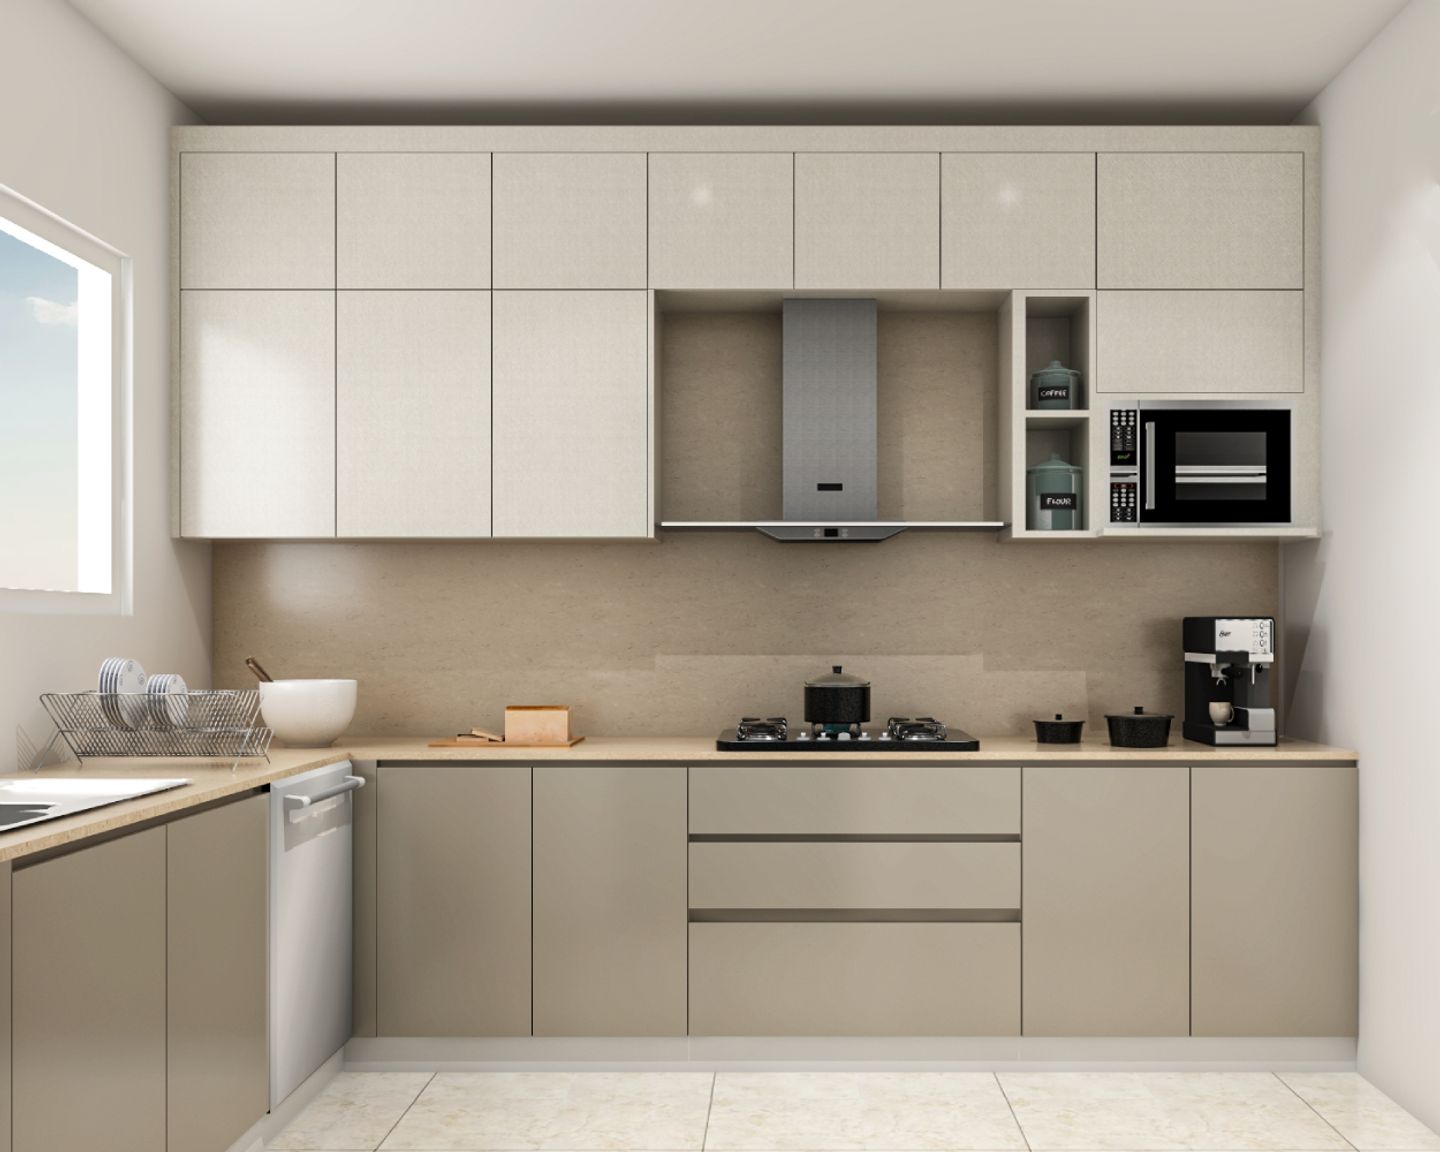 L Shape Modular Kitchen Design With Cream And Champagne-Toned Kitchen ...